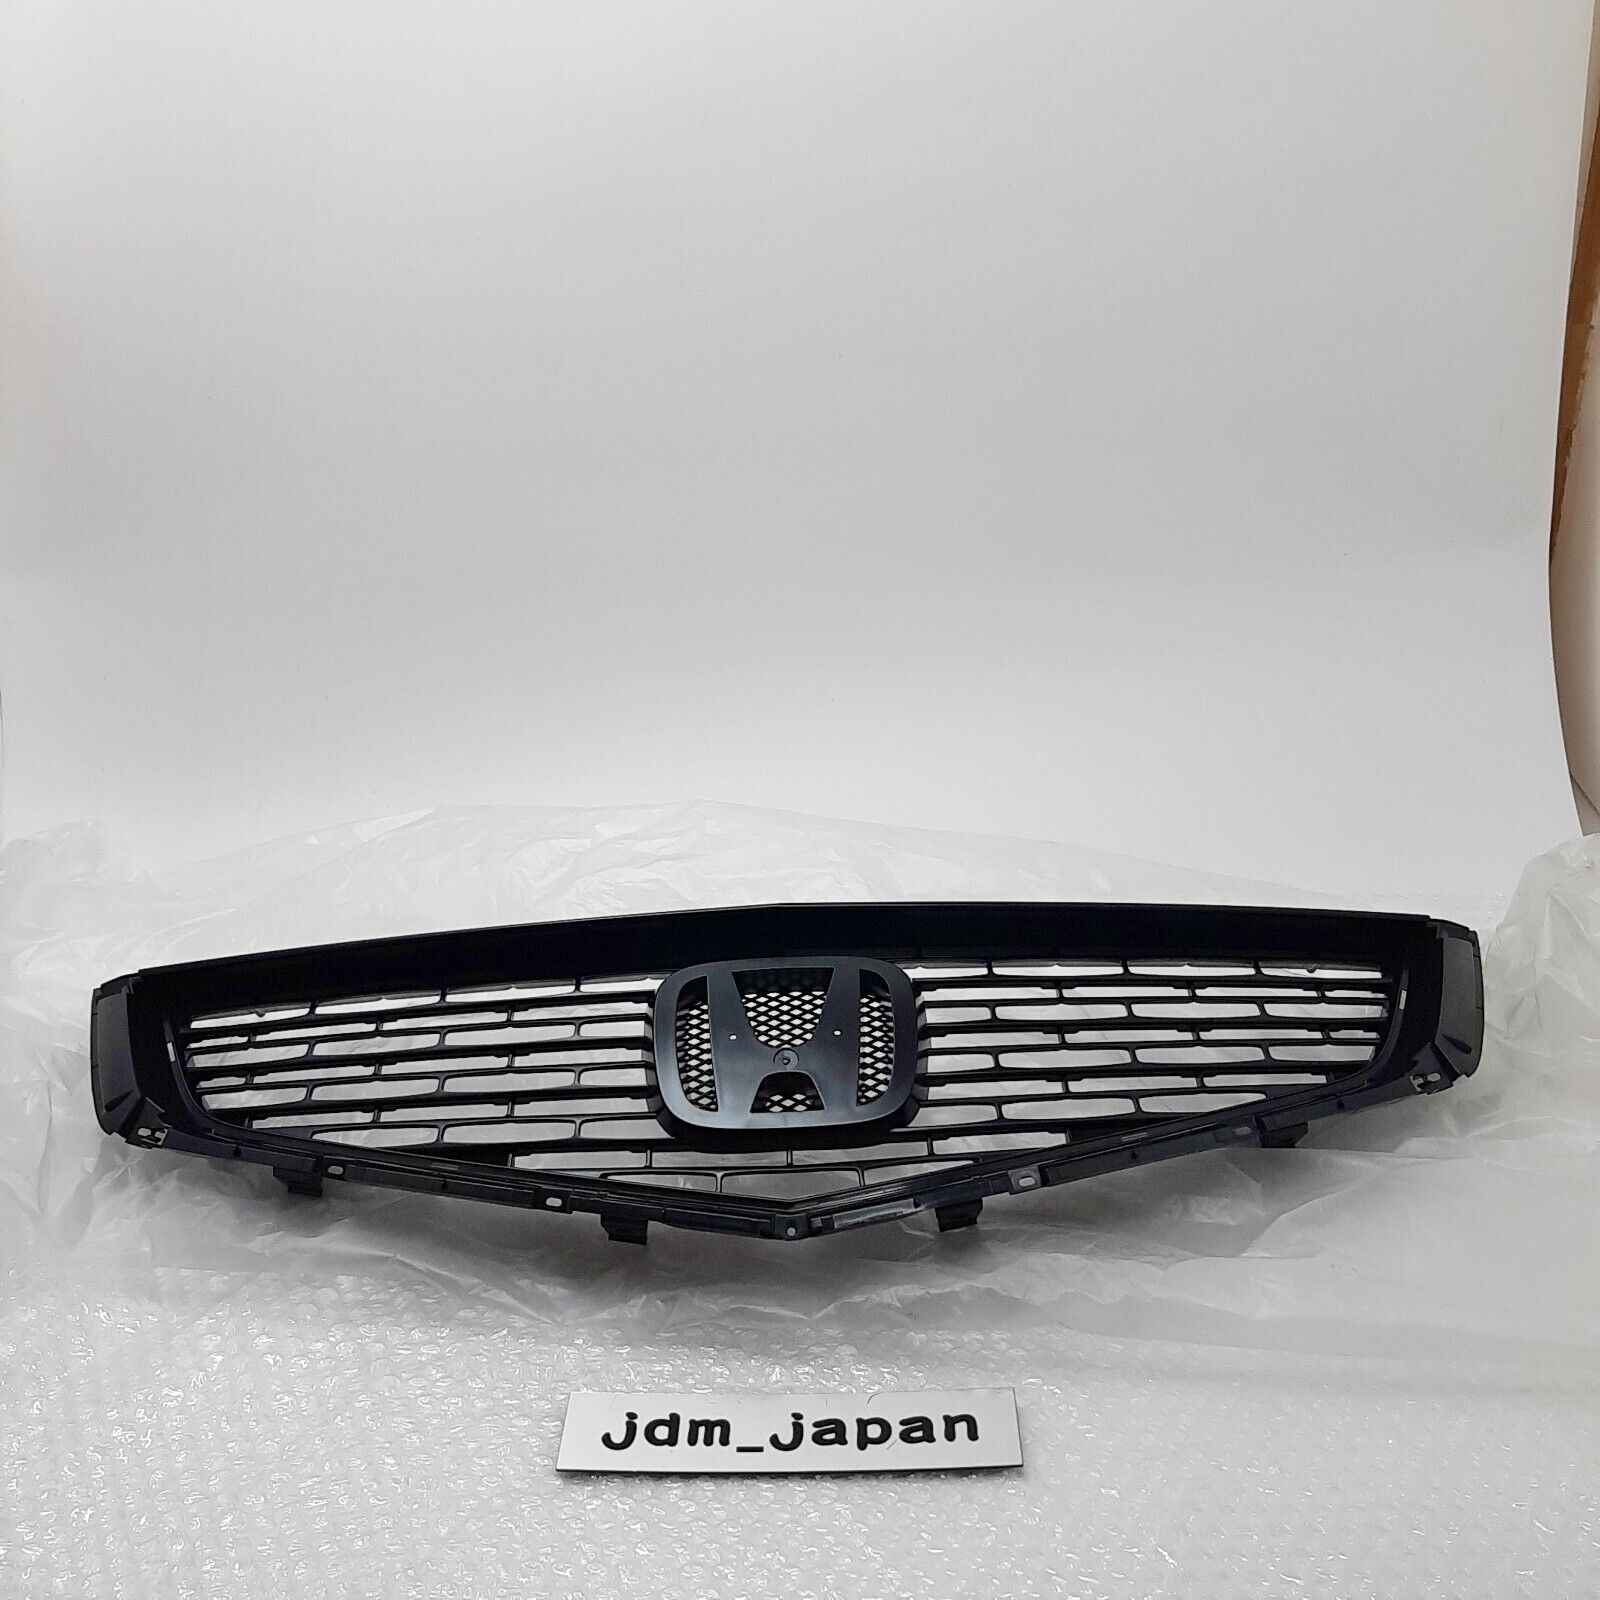 HONDA 71121-SEA-902 Accord TSX CL7 CL9 CM Euro R Front Grille Base Genuine New